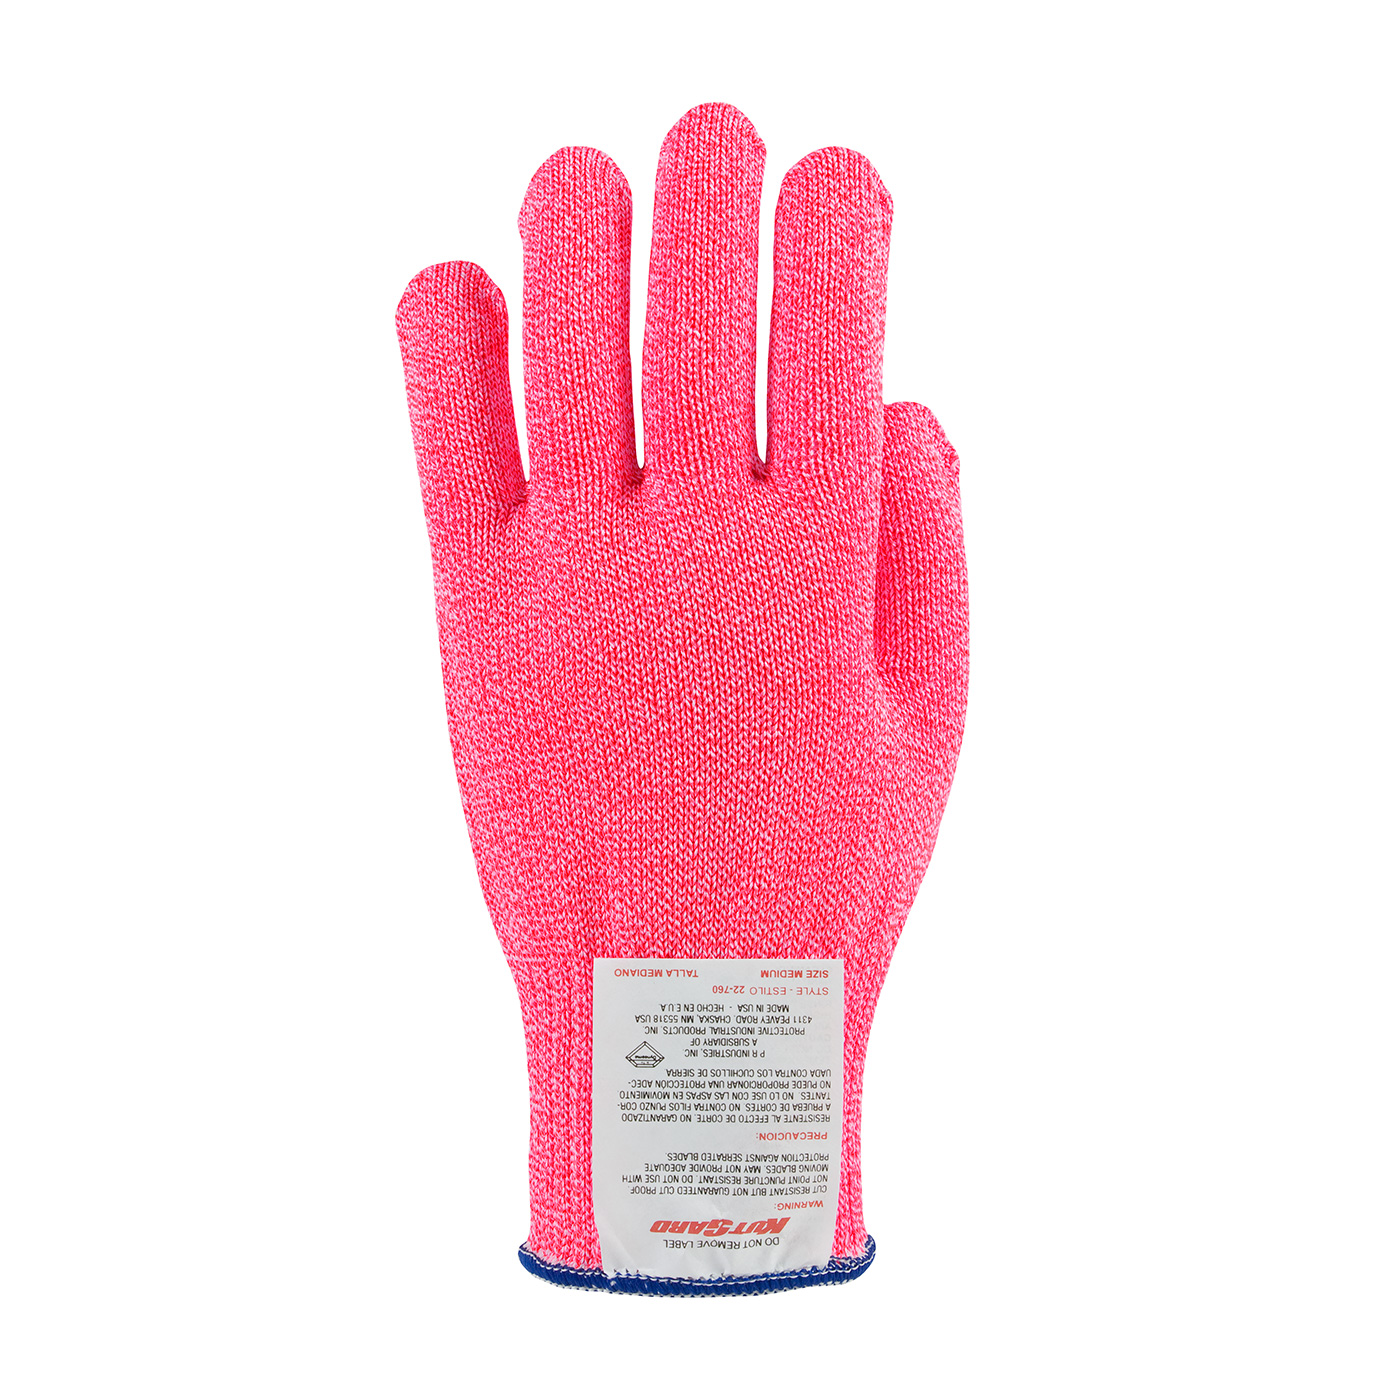 # 22 - 760NP PIP® Neon Pink Kut-Gard® Polyester over Dyneema® / Stainless Steel Core Antimicrobial Glove - Medium Weight